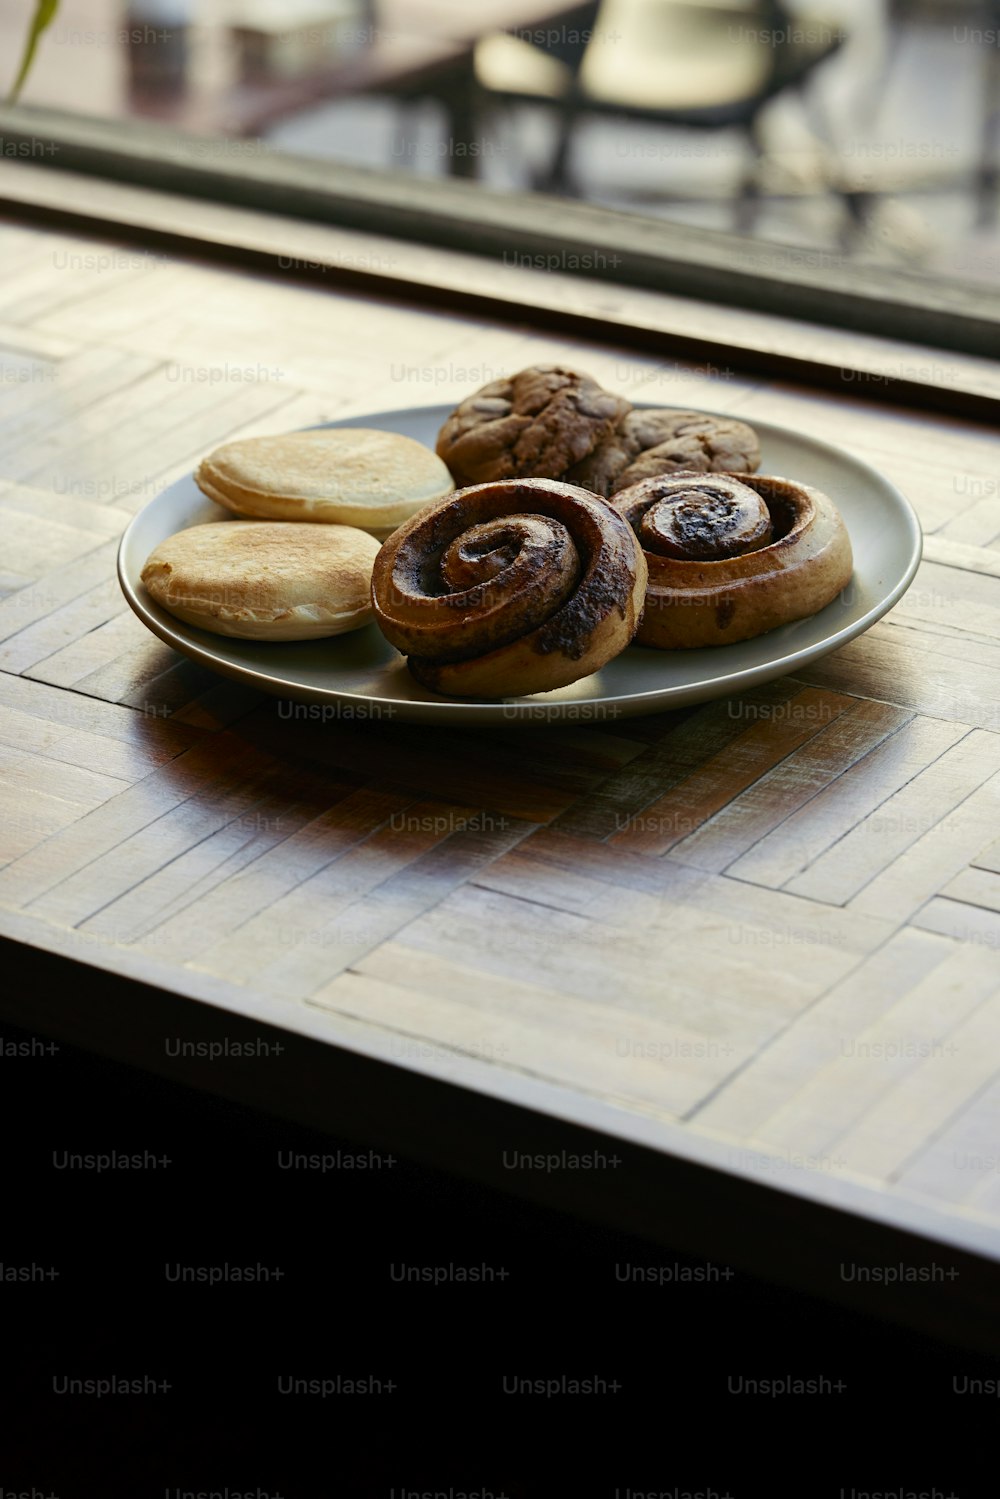 a plate of pastries sitting on a window sill